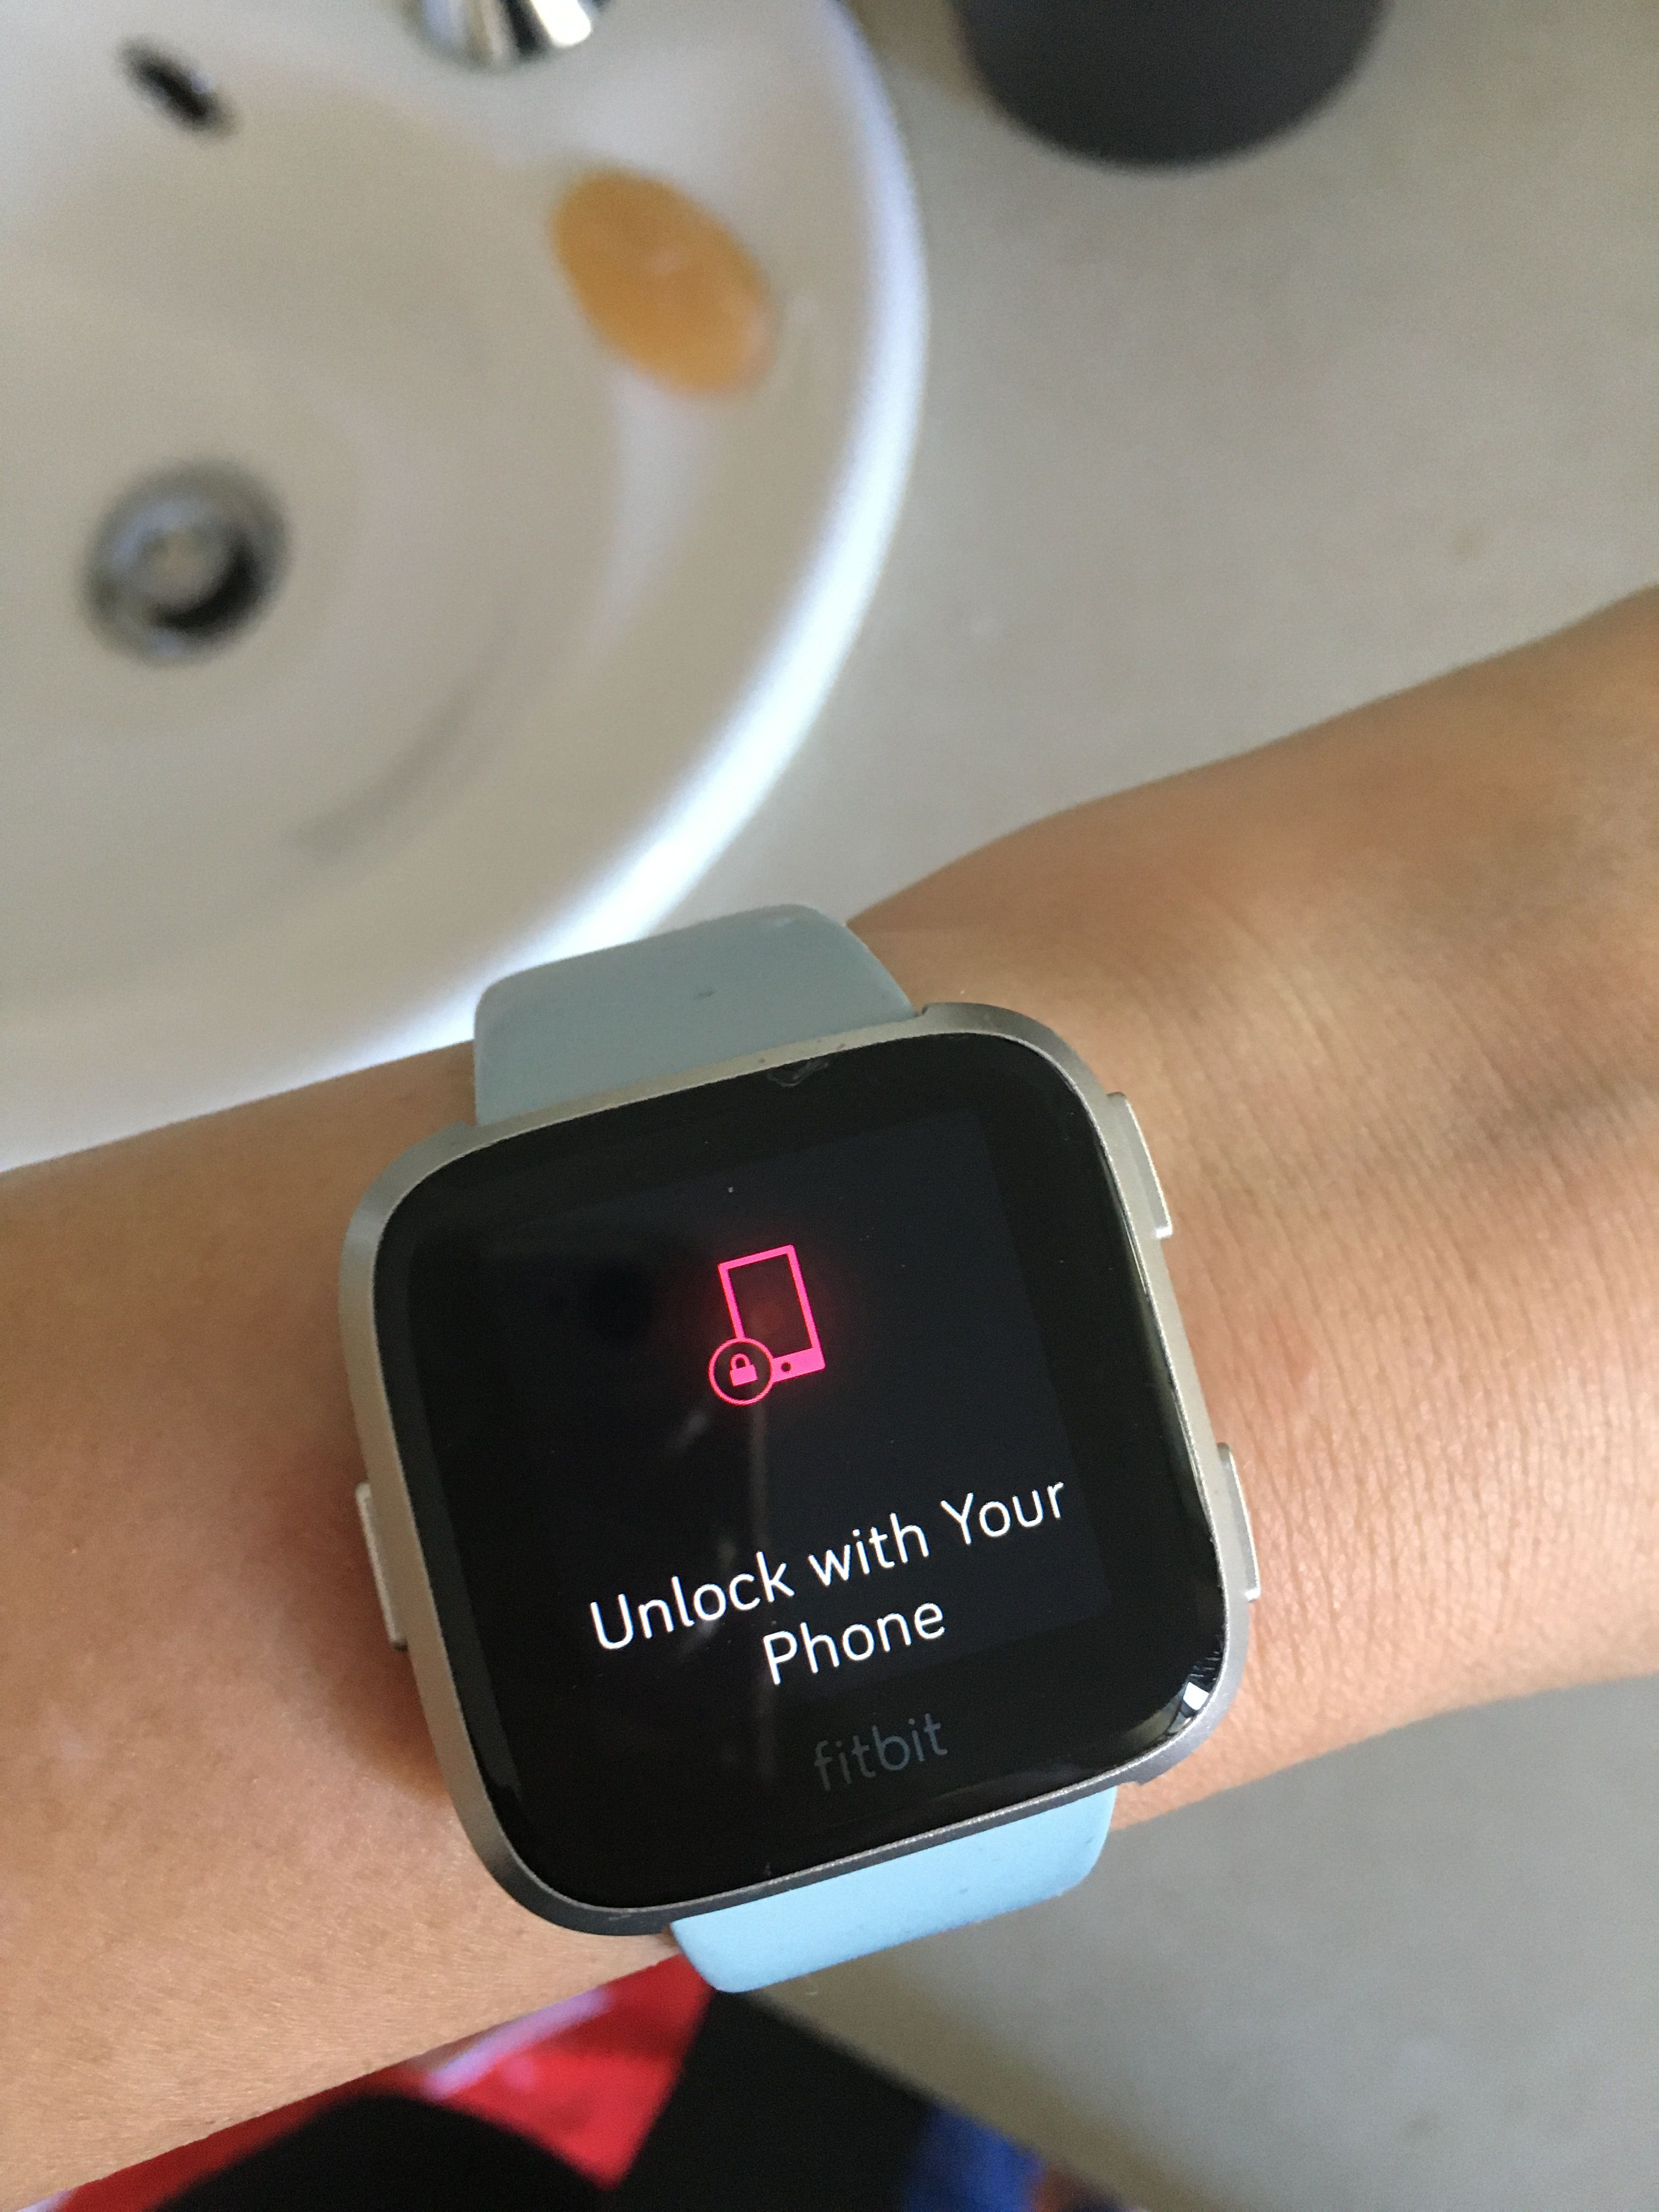 Versa says unlock with your phone 